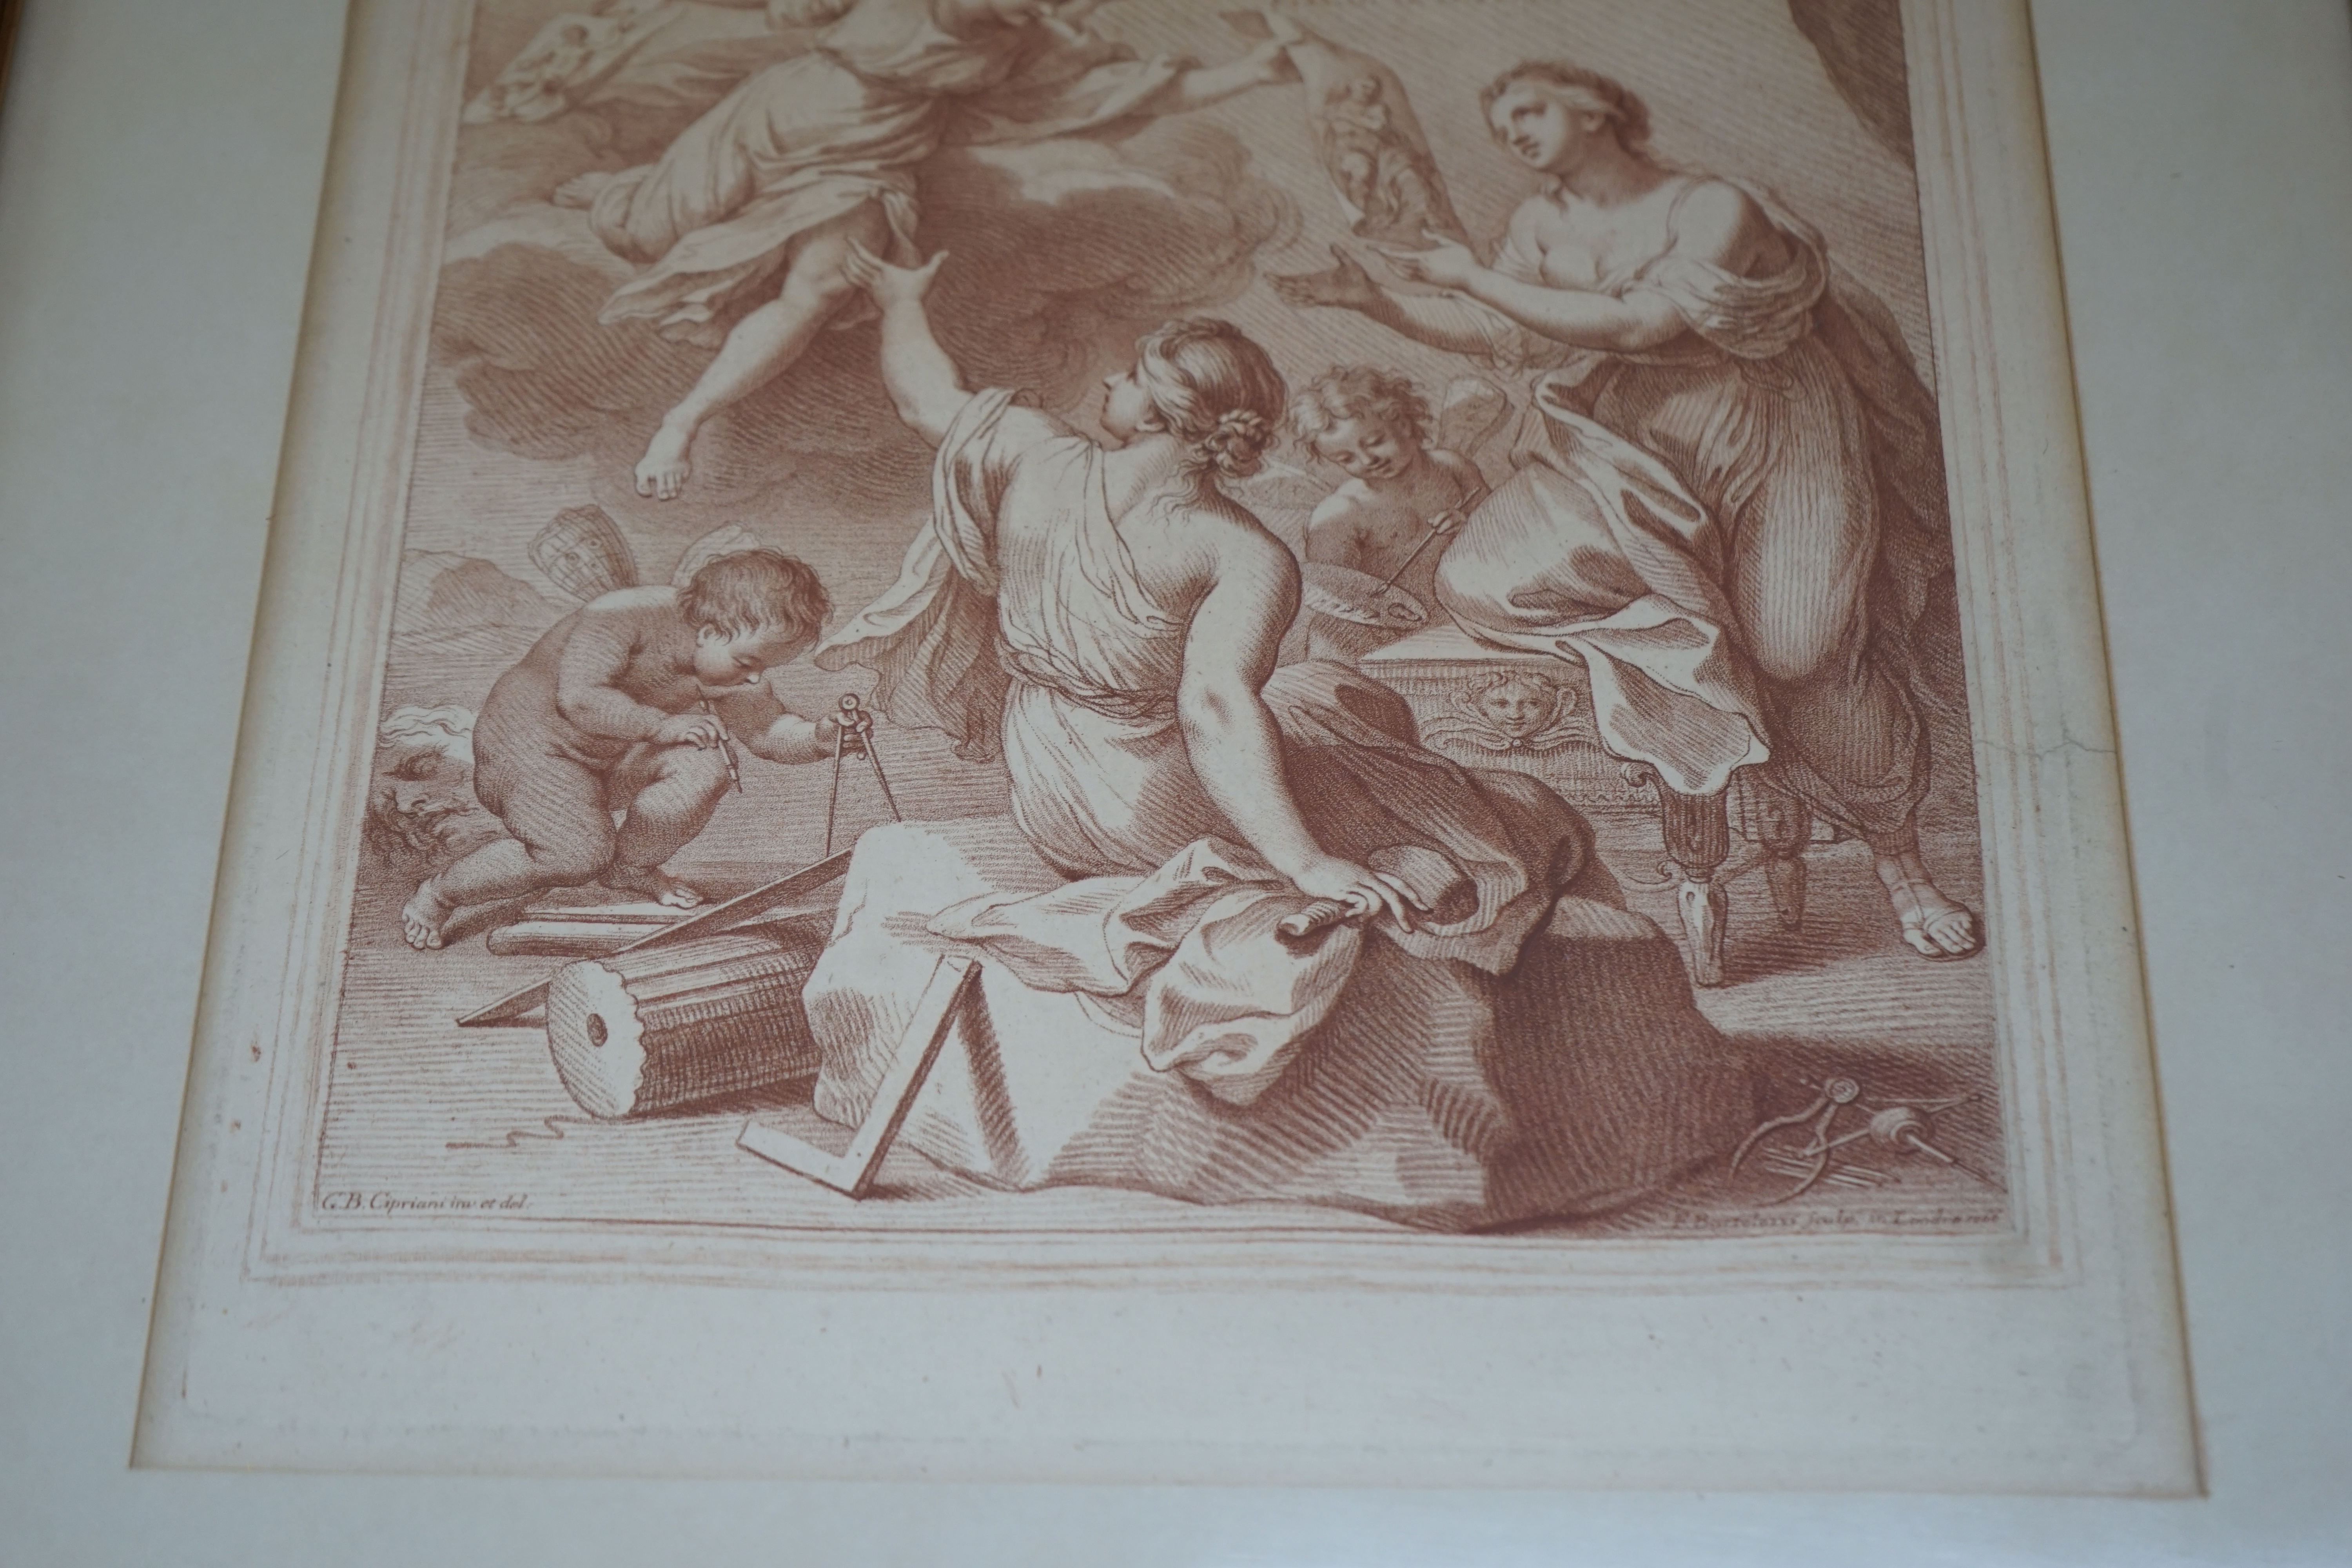 After Francesco Bartolozzi (Italian, 1727-1815), sanguine engraving, 'A century of prints from drawings published with notes by Charles Rogers’ and ‘Paris and Oenone’, largest 41 x 28cm. Condition - poor to fair, brownin